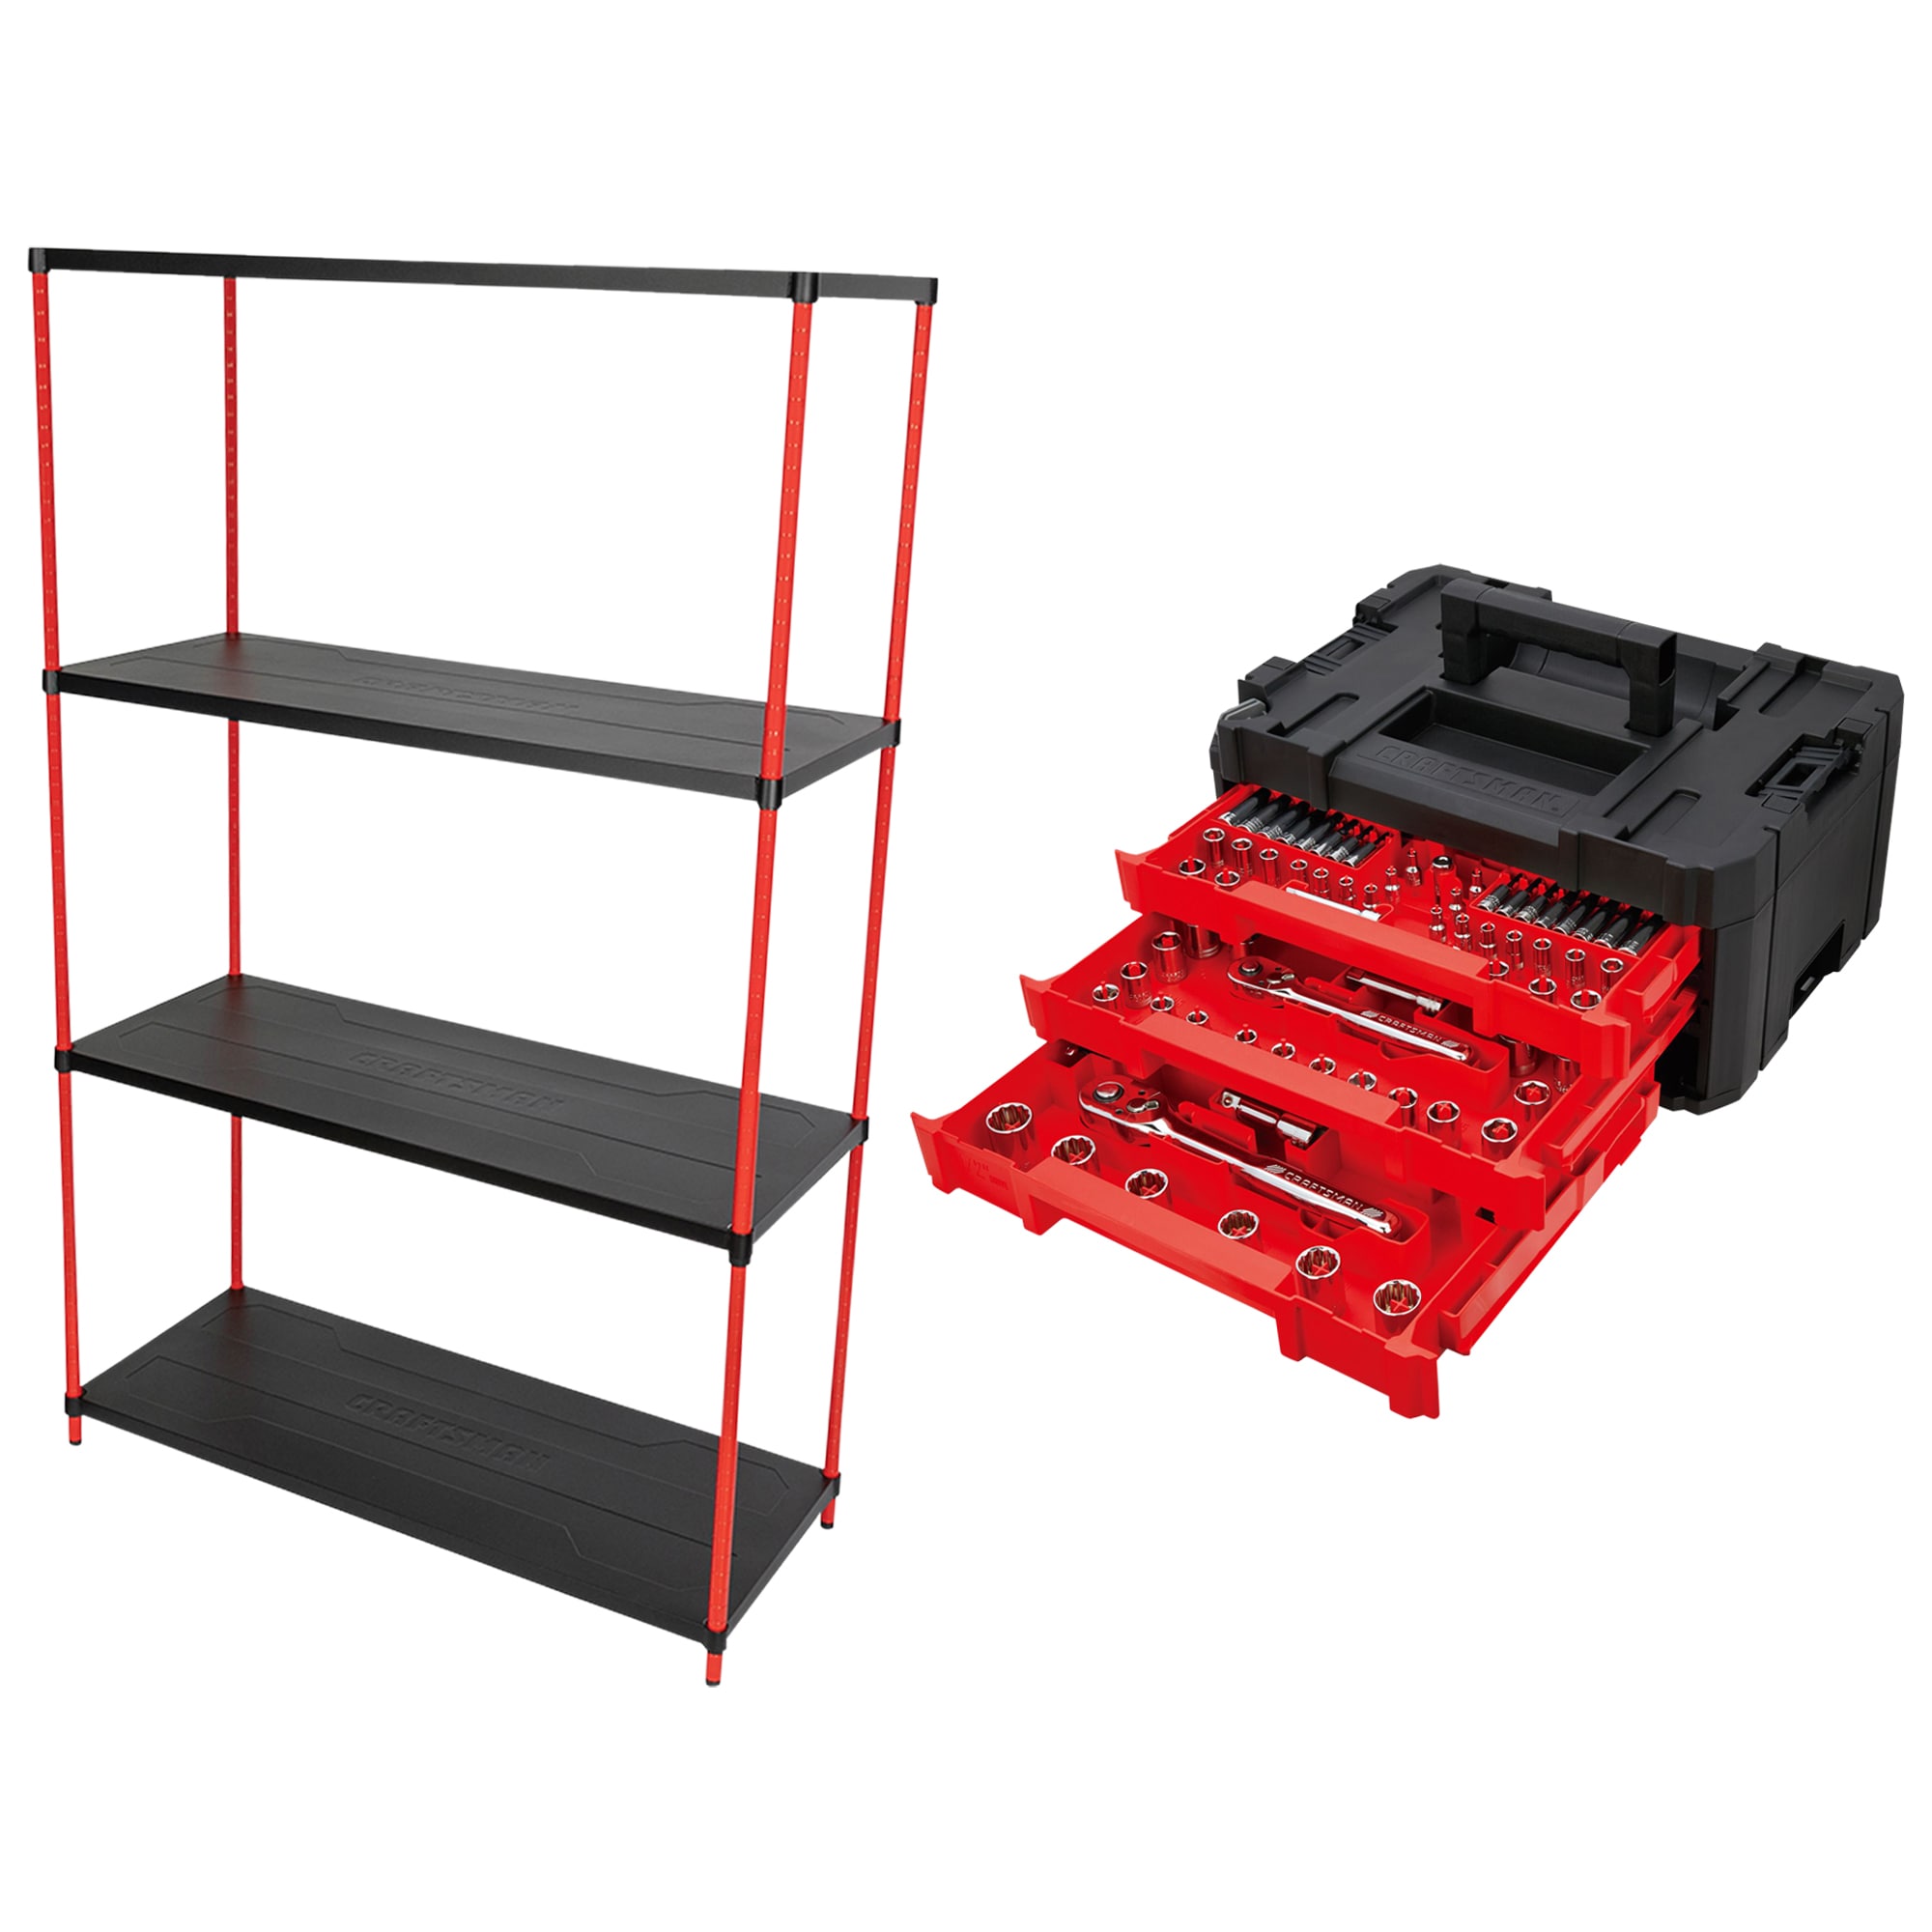 CRAFTSMAN Steel 4-Tier Utility Shelving Unit (45-in W x 18-in D x 72-in H) & VERSASTACK 216-Piece Standard (SAE) and Metric Combination Polished